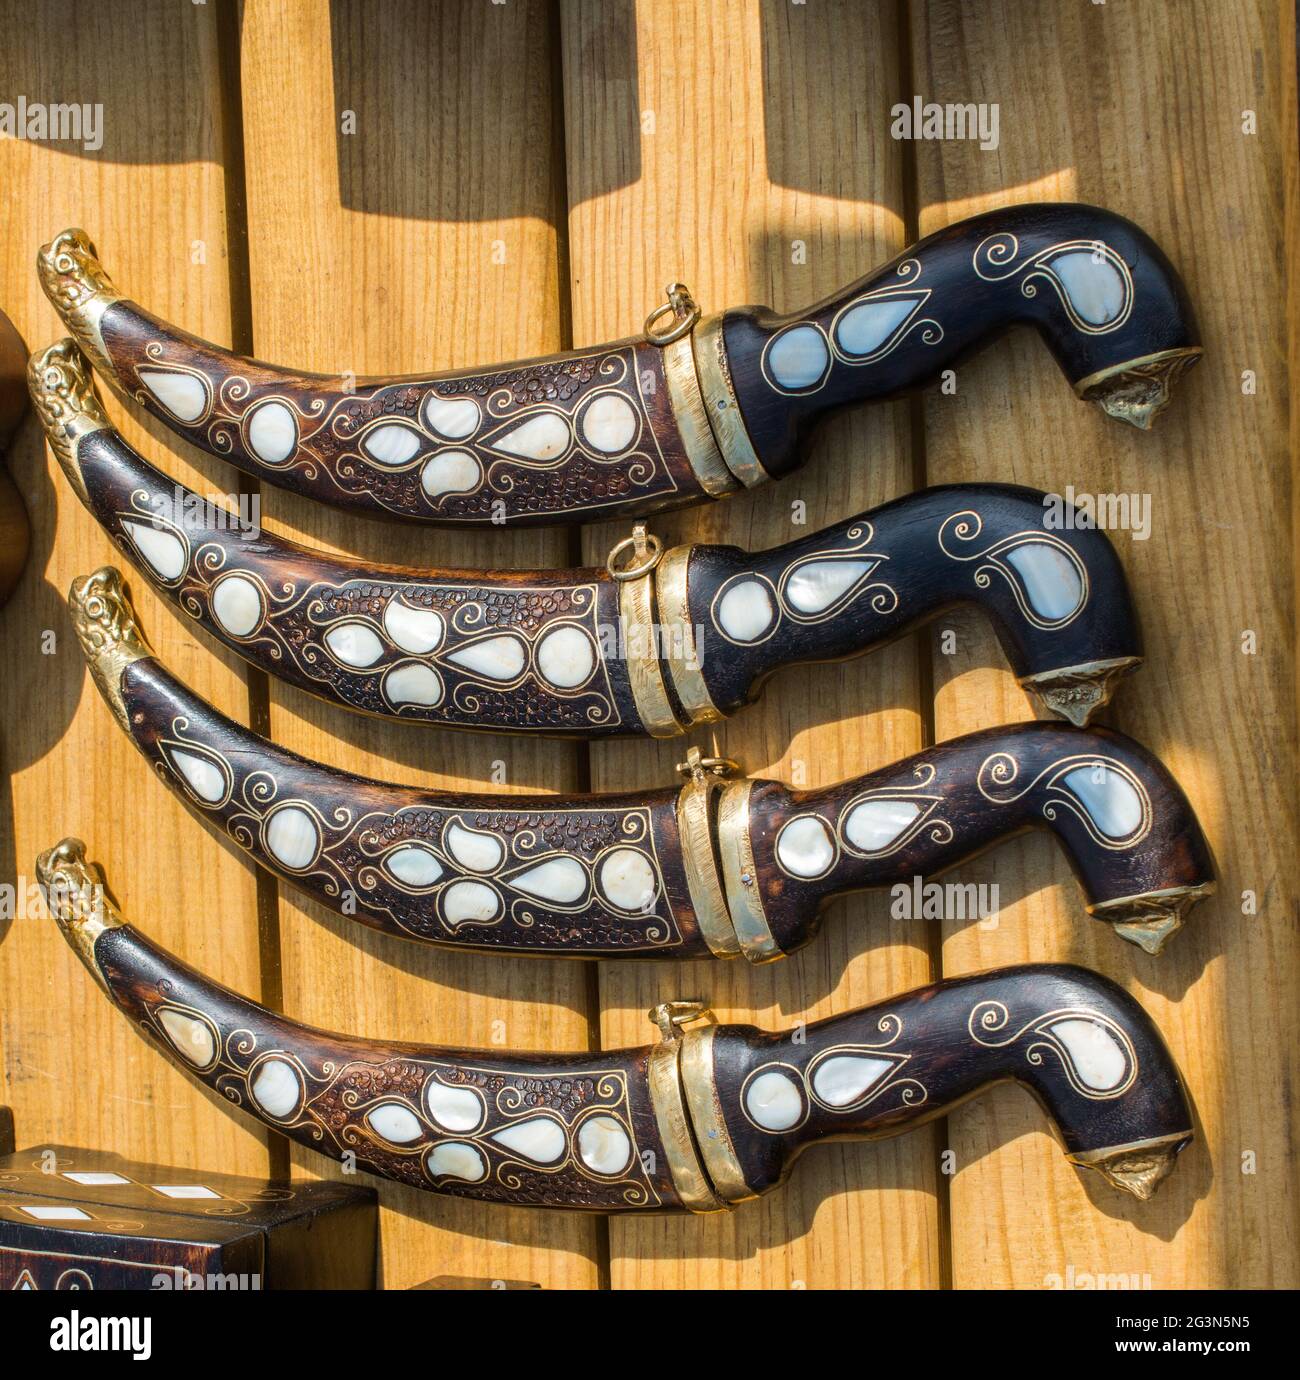 Turkish style daggers with mother of pearl inlays Stock Photo